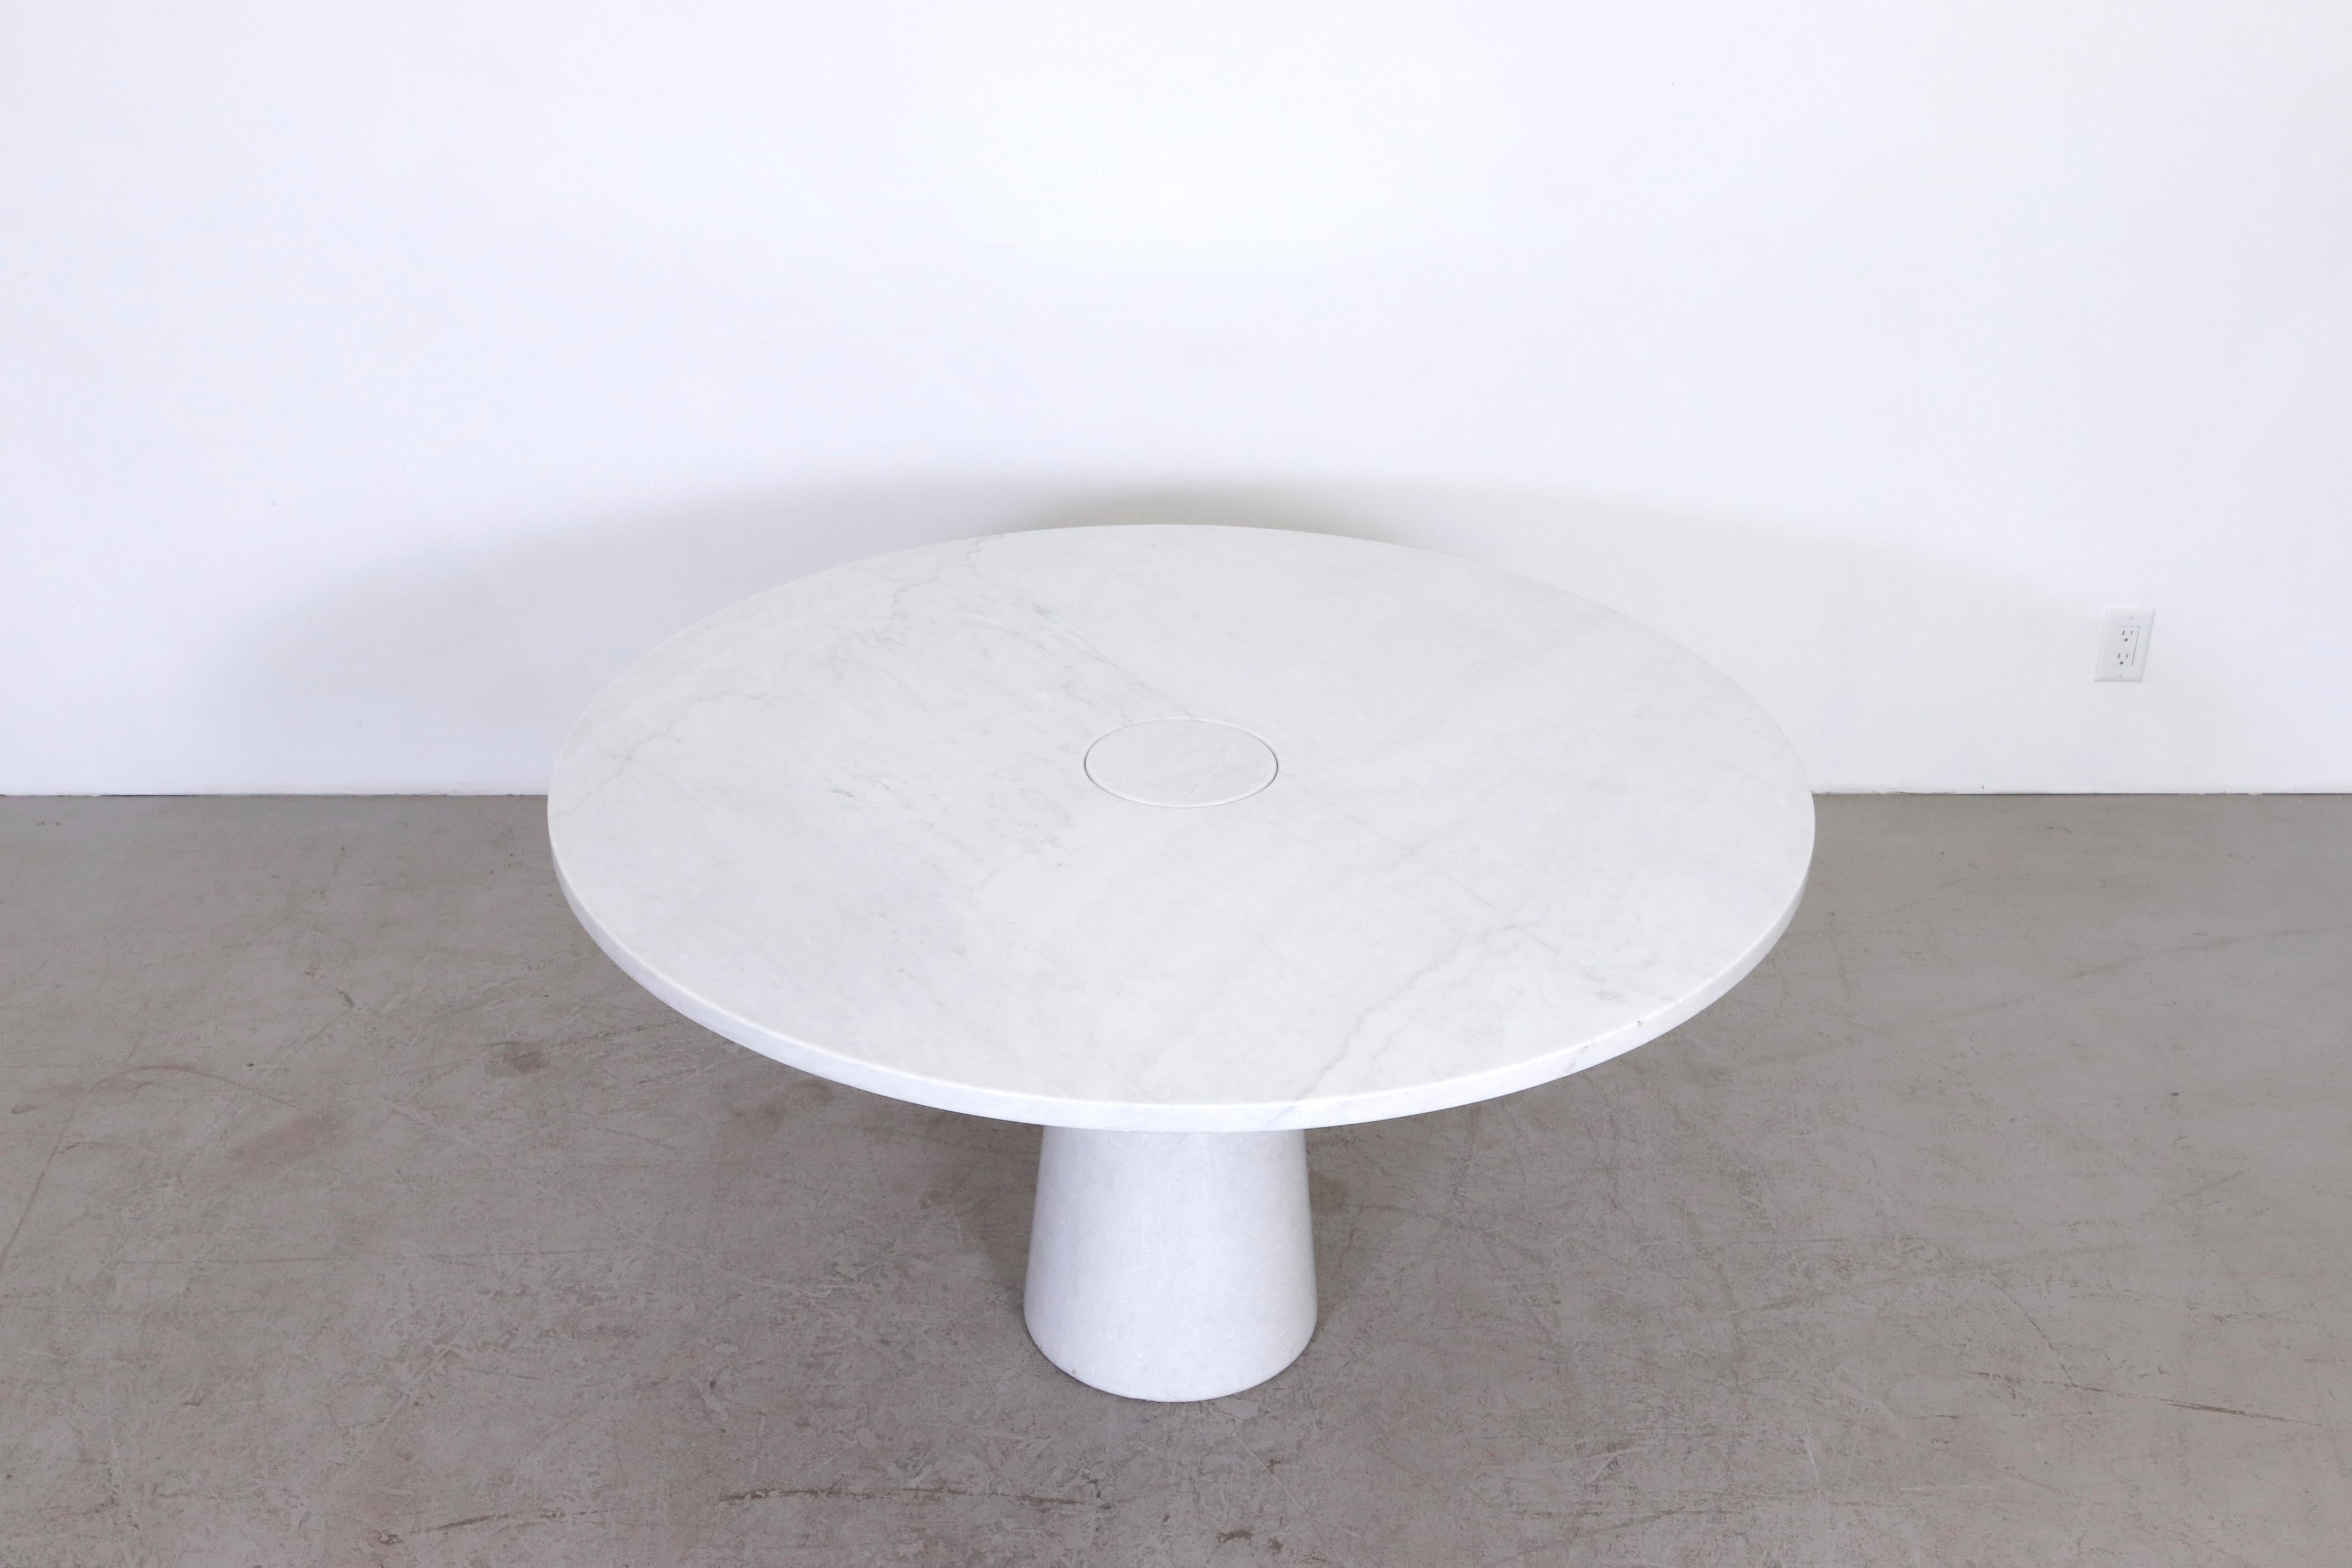 Angelo Mangiarotti Eros table, Carrara marble, Italy circa 1970. Beautifully designed gravity-based dining table using its own weight for stability. In original condition with wear consistent with age and use.